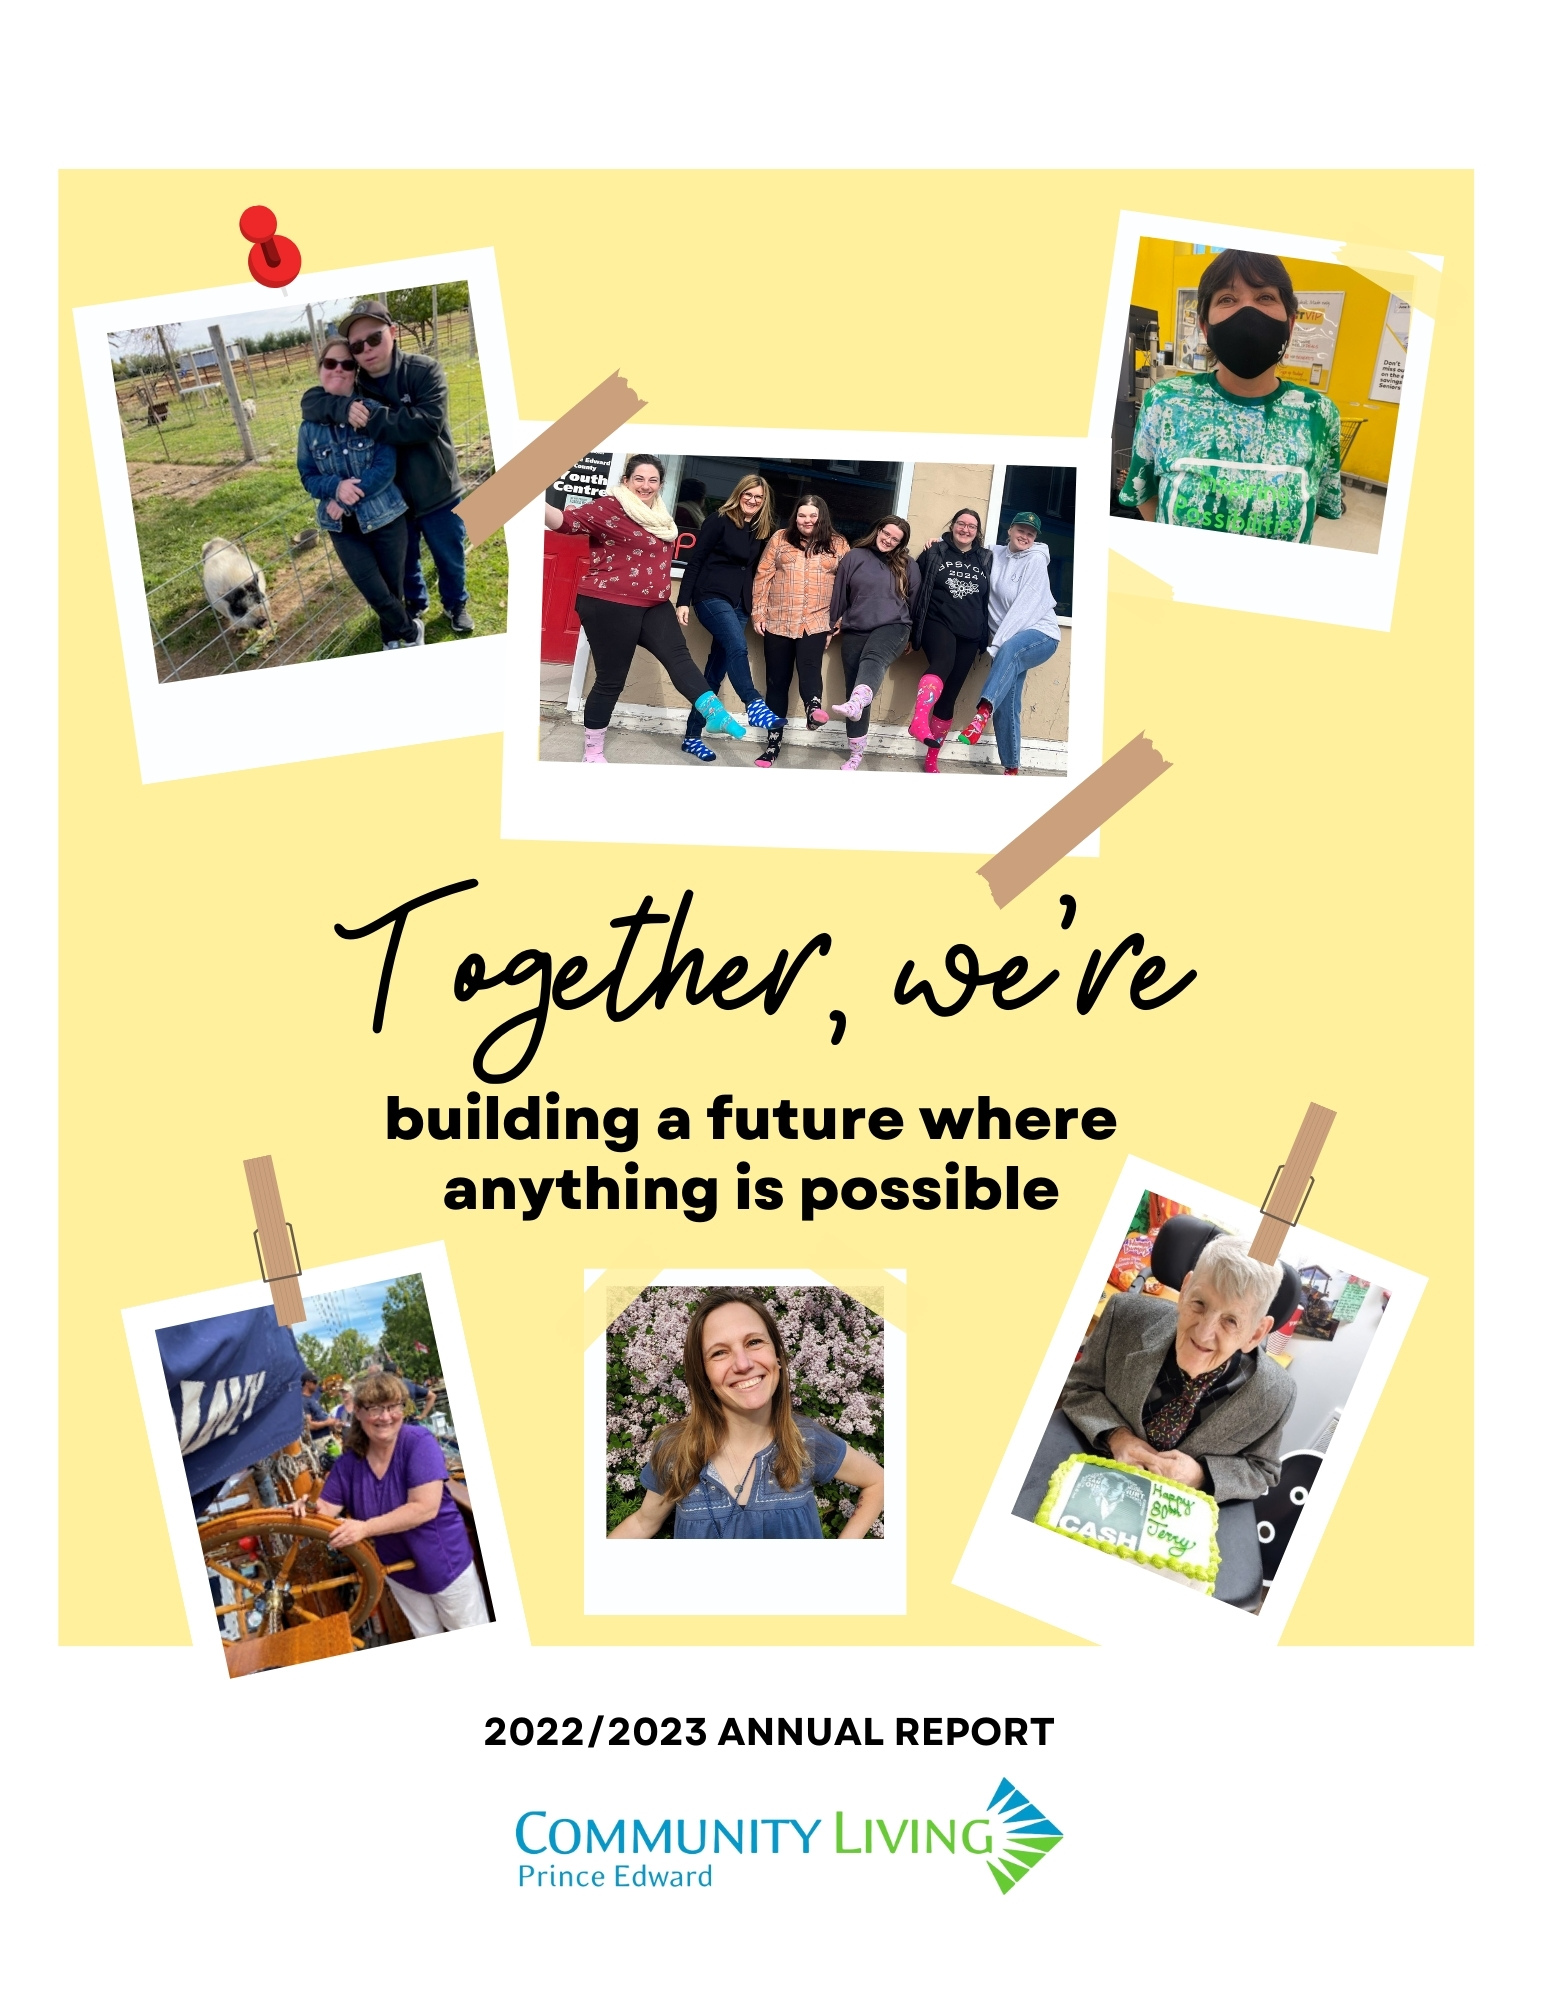 Annual Report 2023 to 2023 - Page 1 